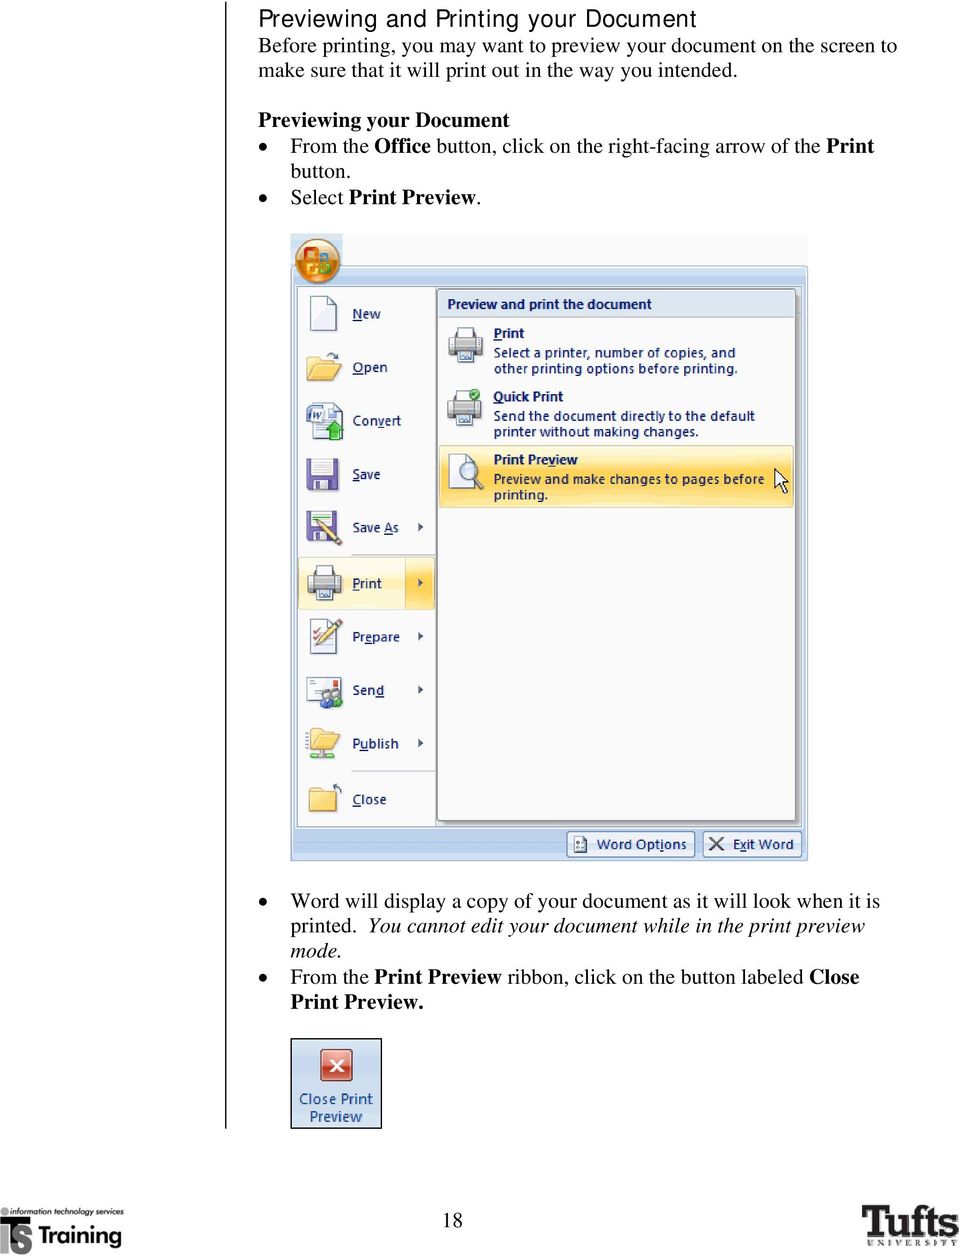 Previewing your Document From the Office button, click on the right-facing arrow of the Print button. Select Print Preview.